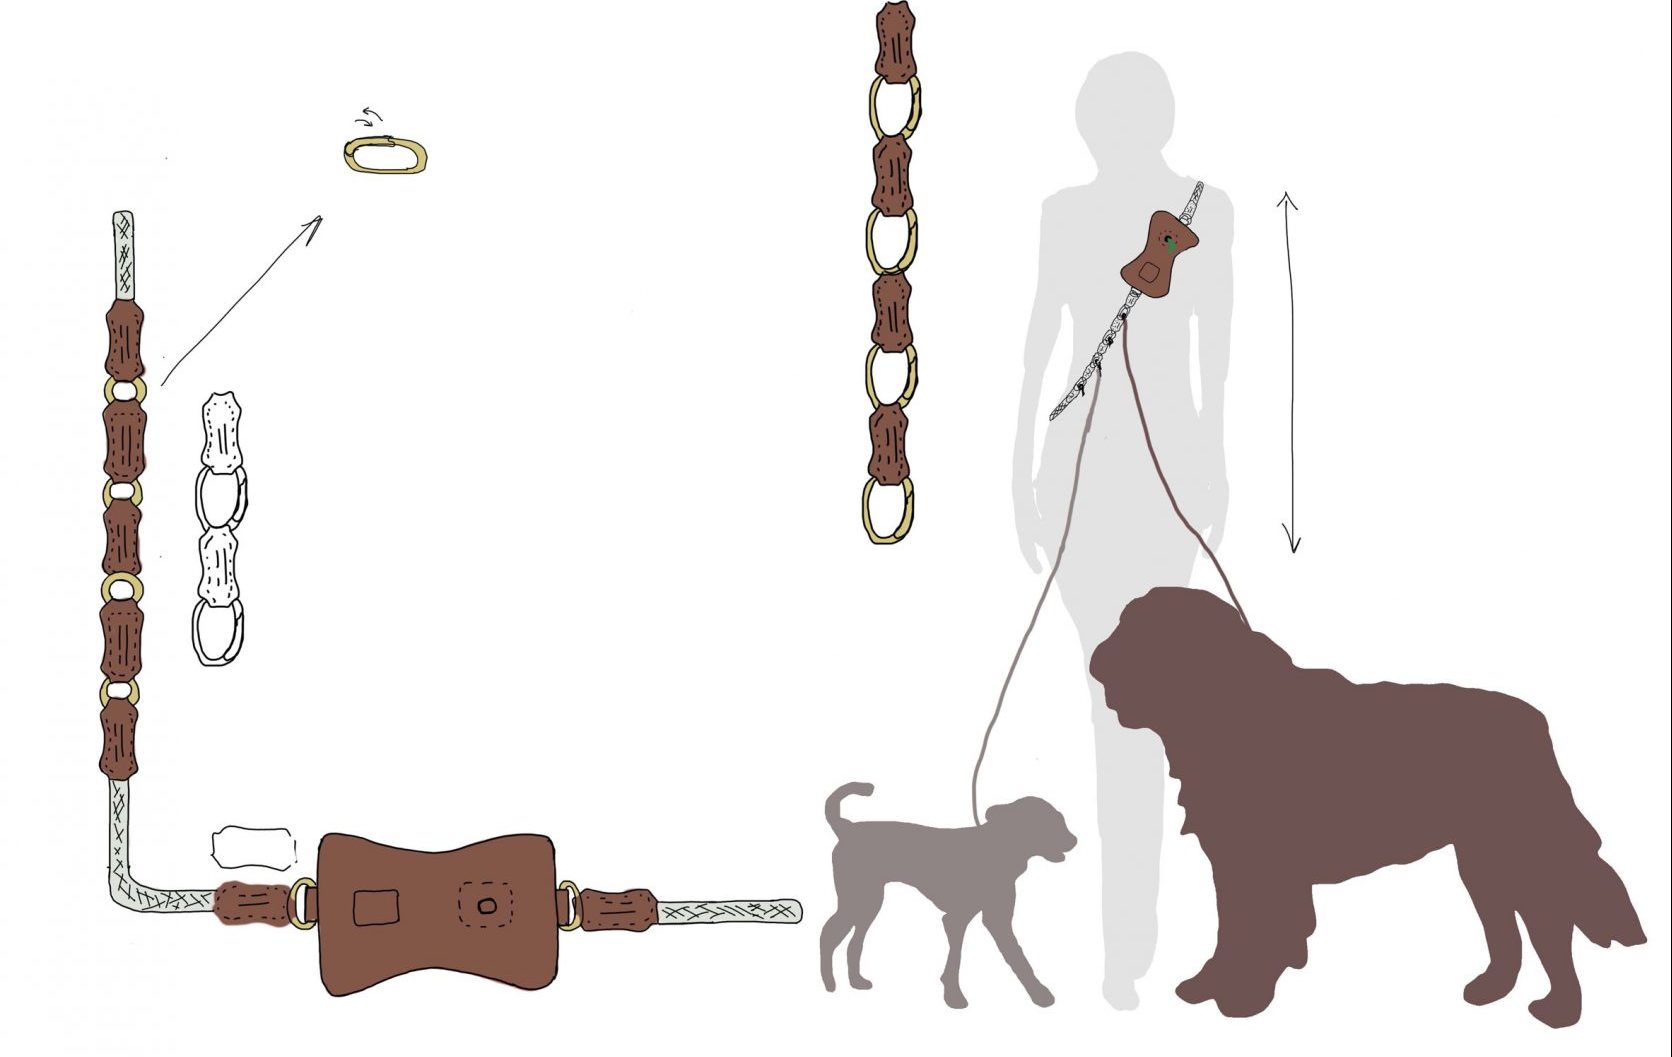 An illustration of a hand-free dog lead